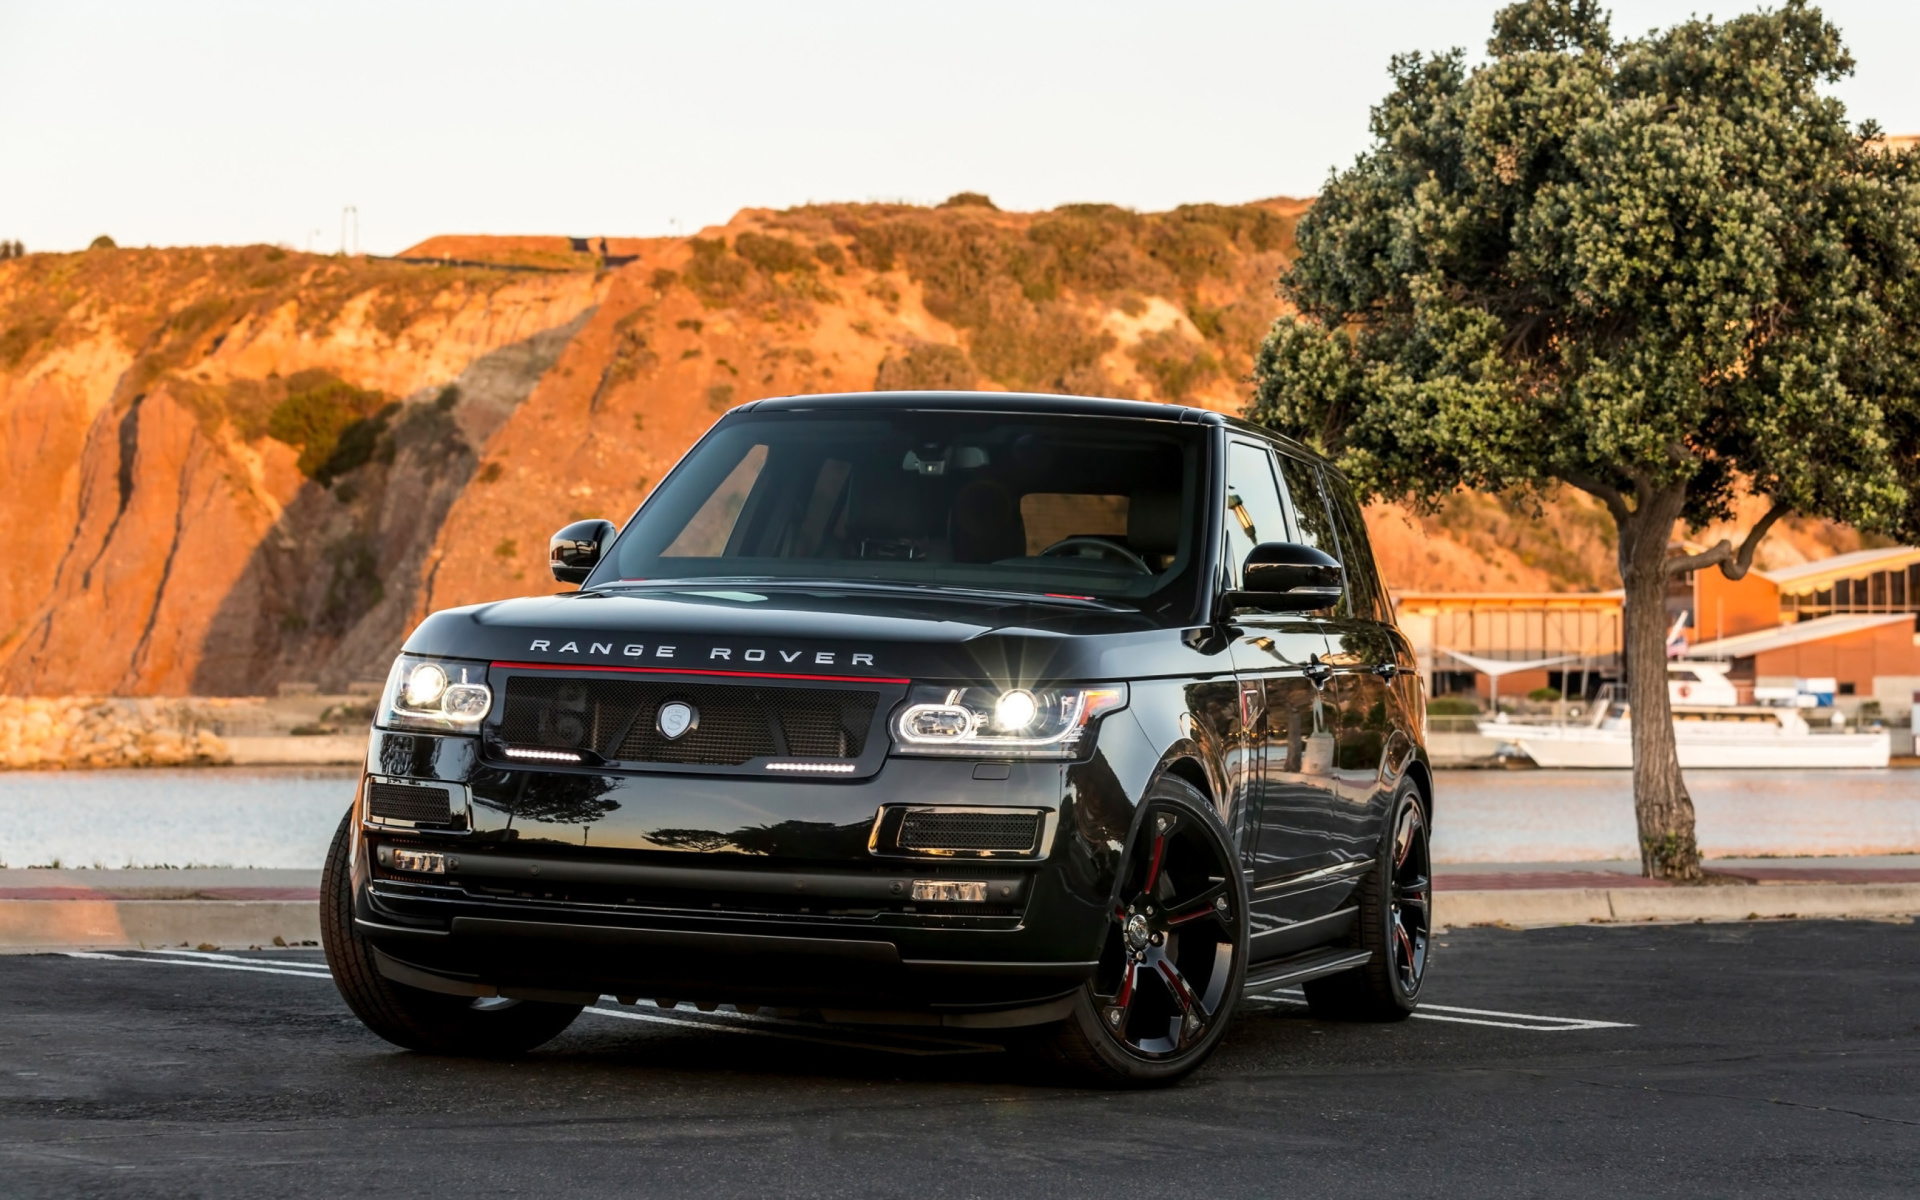 Range Rover STRUT with Grille Package wallpaper 1920x1200